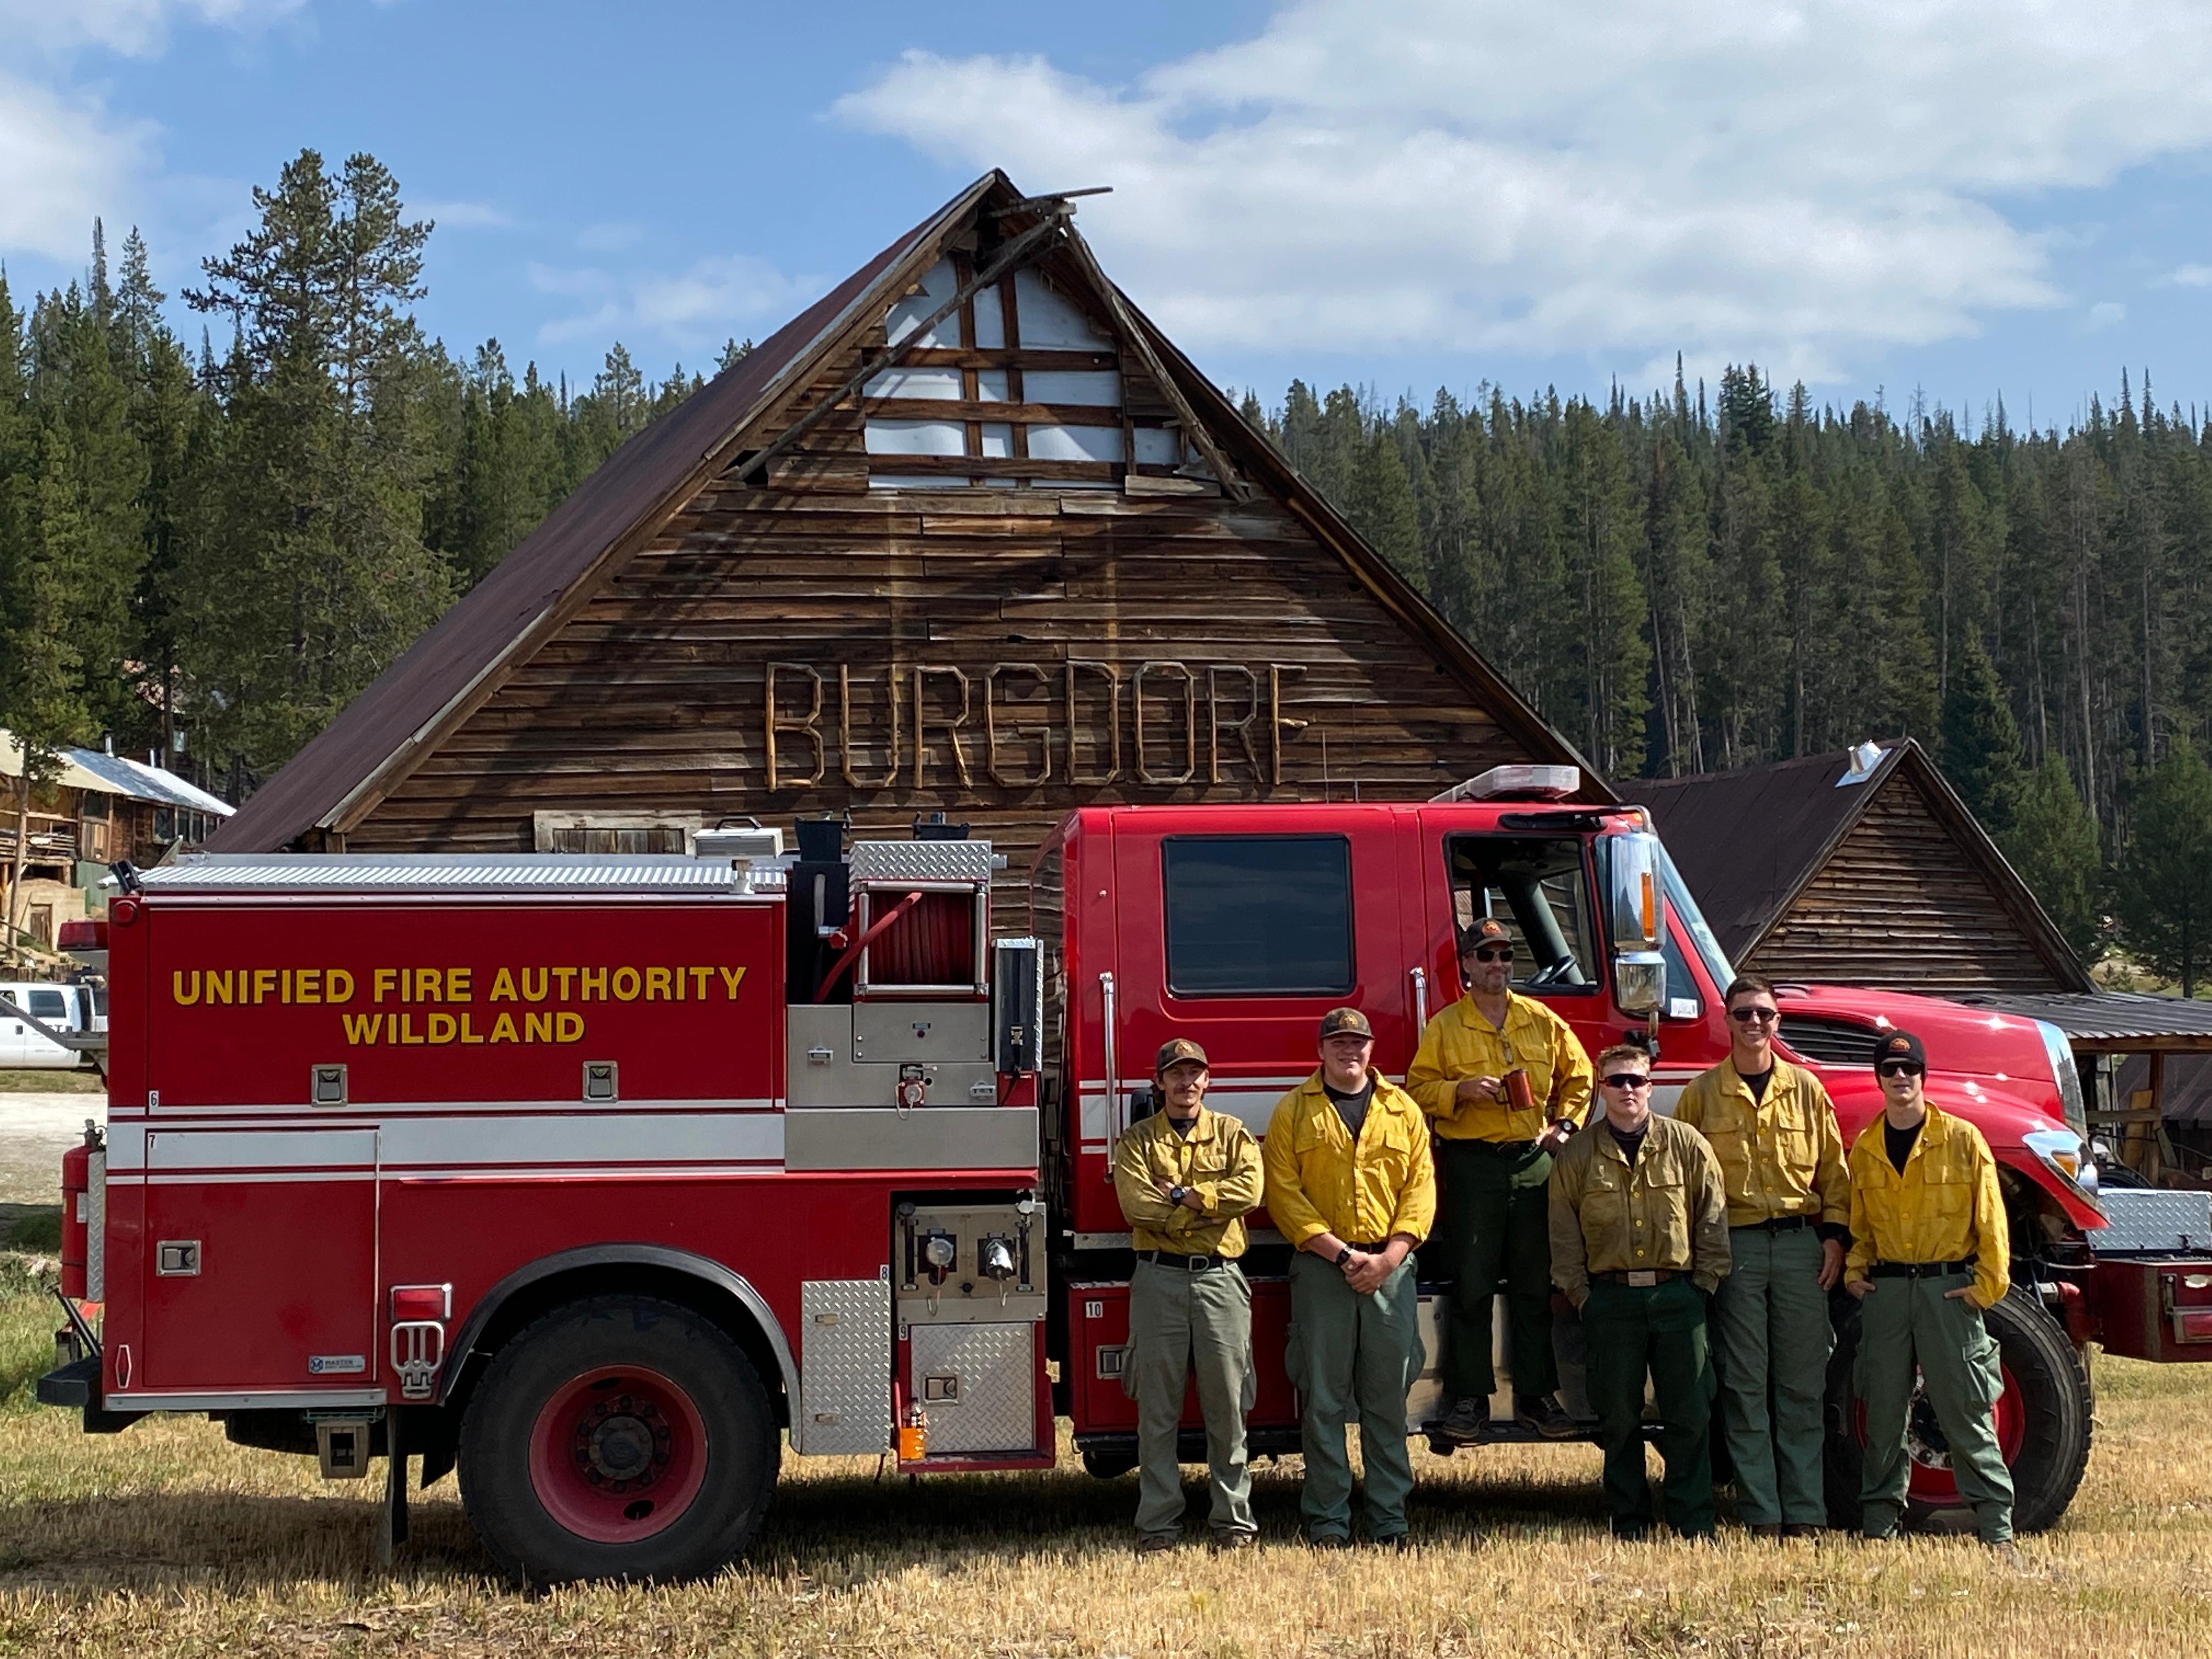 Unified Fire Authority Wildland Engine from Utah